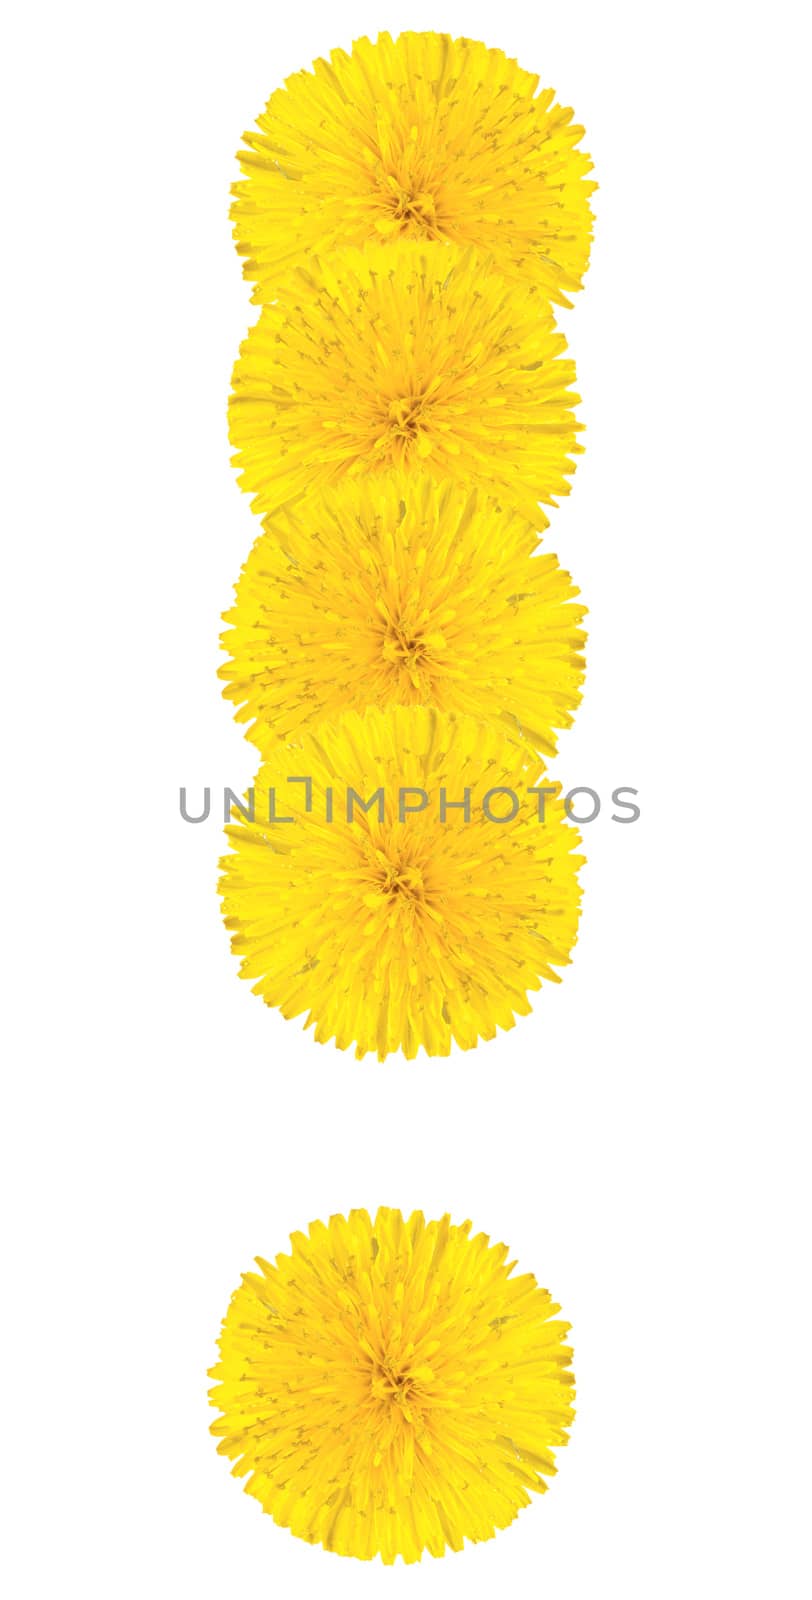 Exclamation sing made from dandelion flower isolated on white background